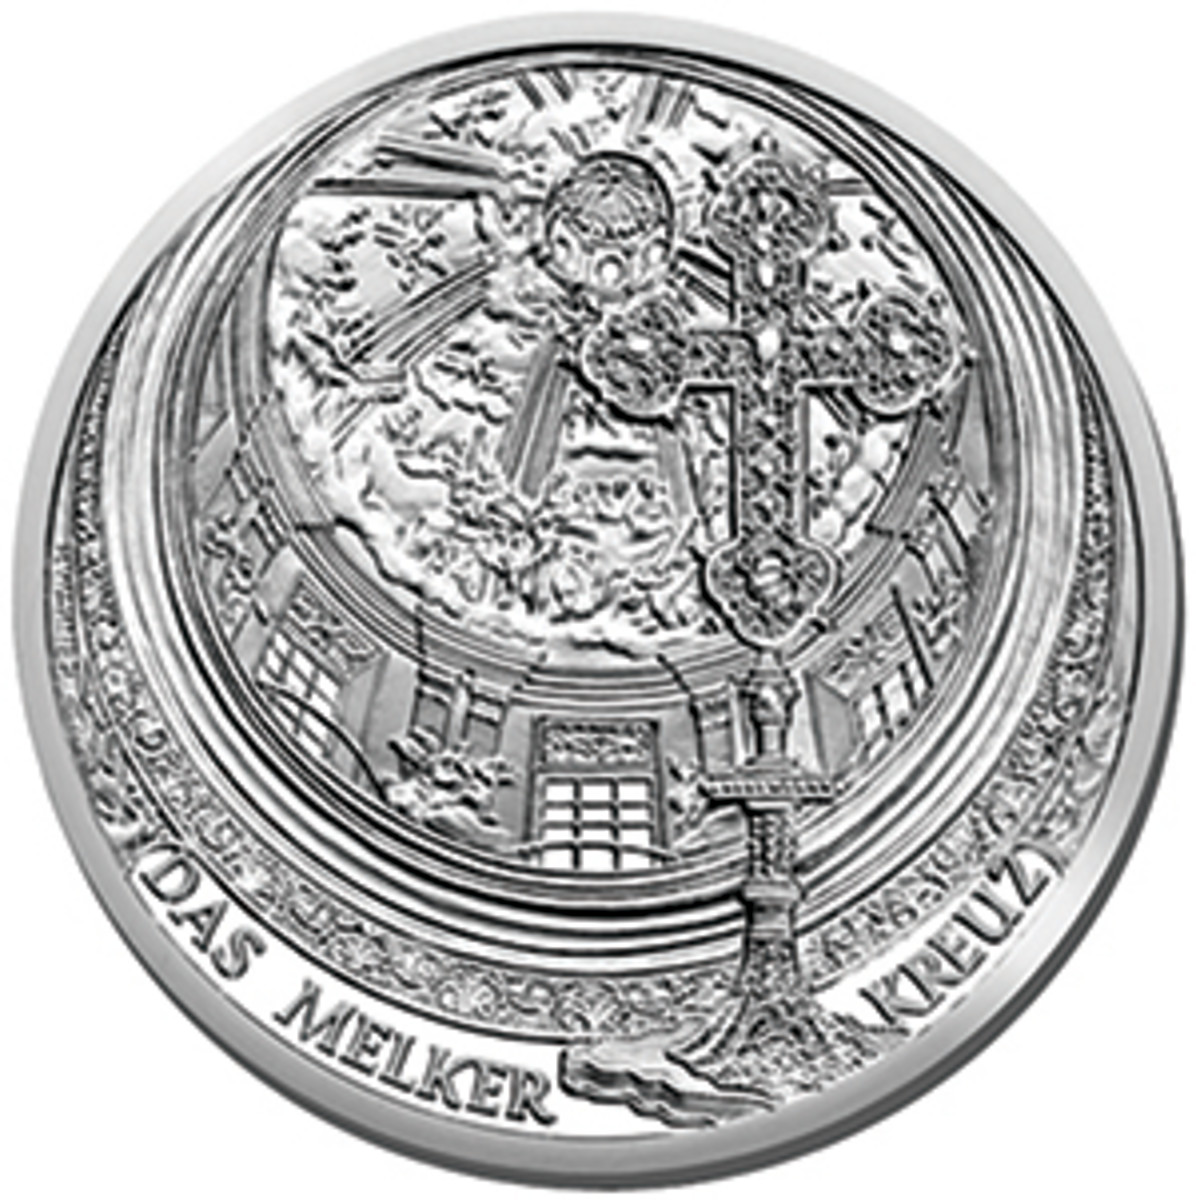 In a short period from 2007 to 2010 Thomas Pesendorfer created a run of wonderful silver 10 and 20 Euro’s which won five COTY category awards. This inner view of the Melk Abbey dome displays fantastic depth for a standard struck coin.